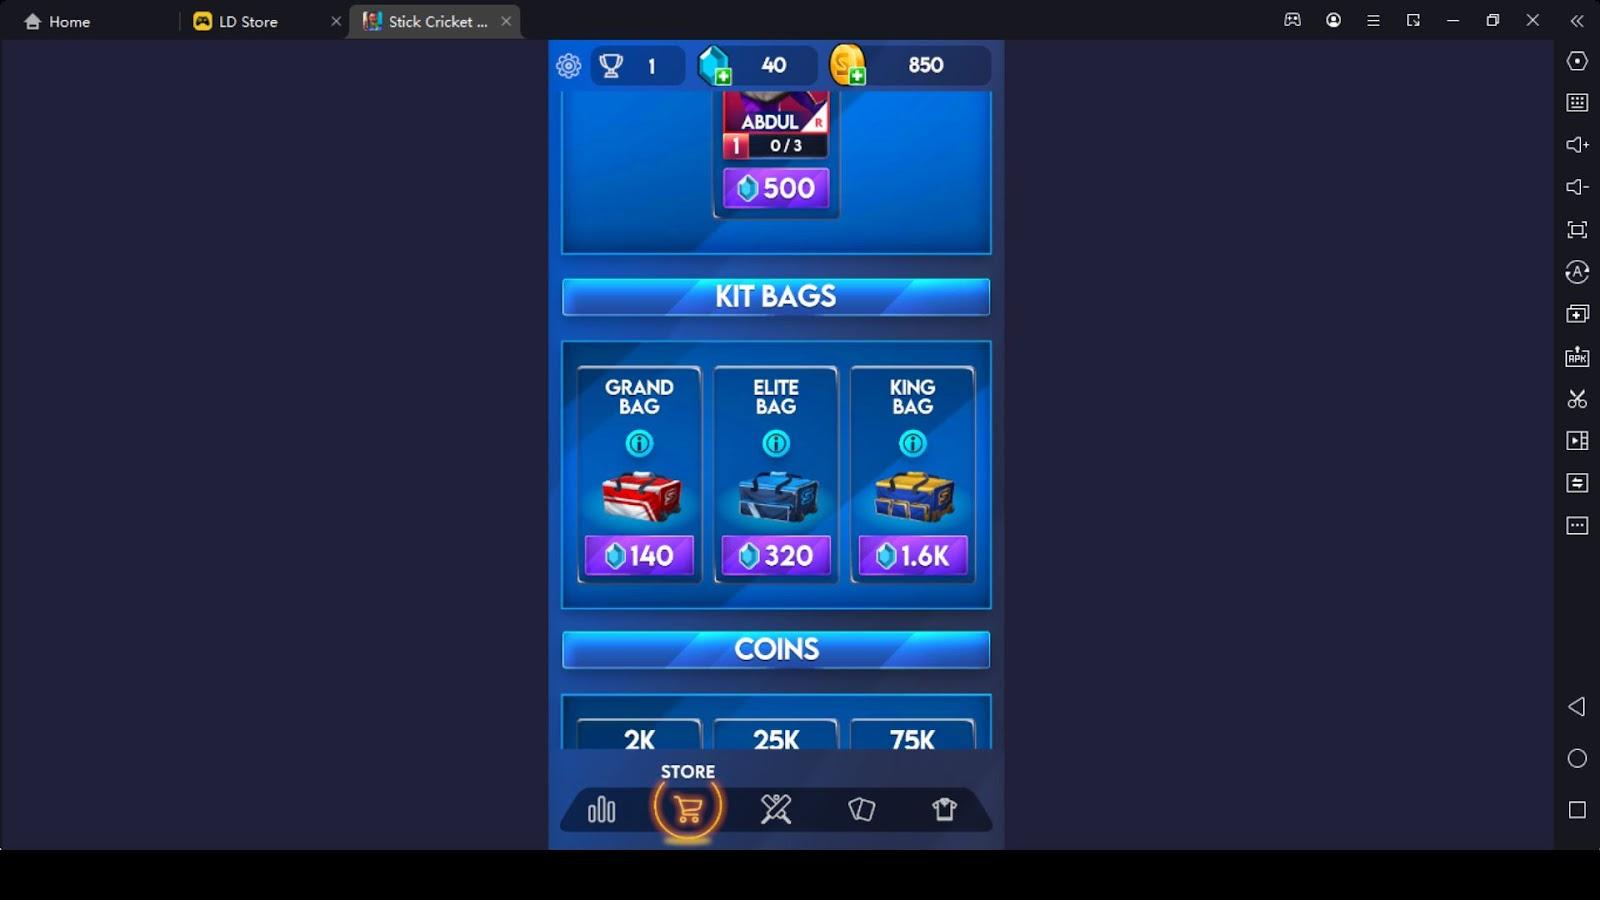 What are Kit Bags in Stick Cricket Clash